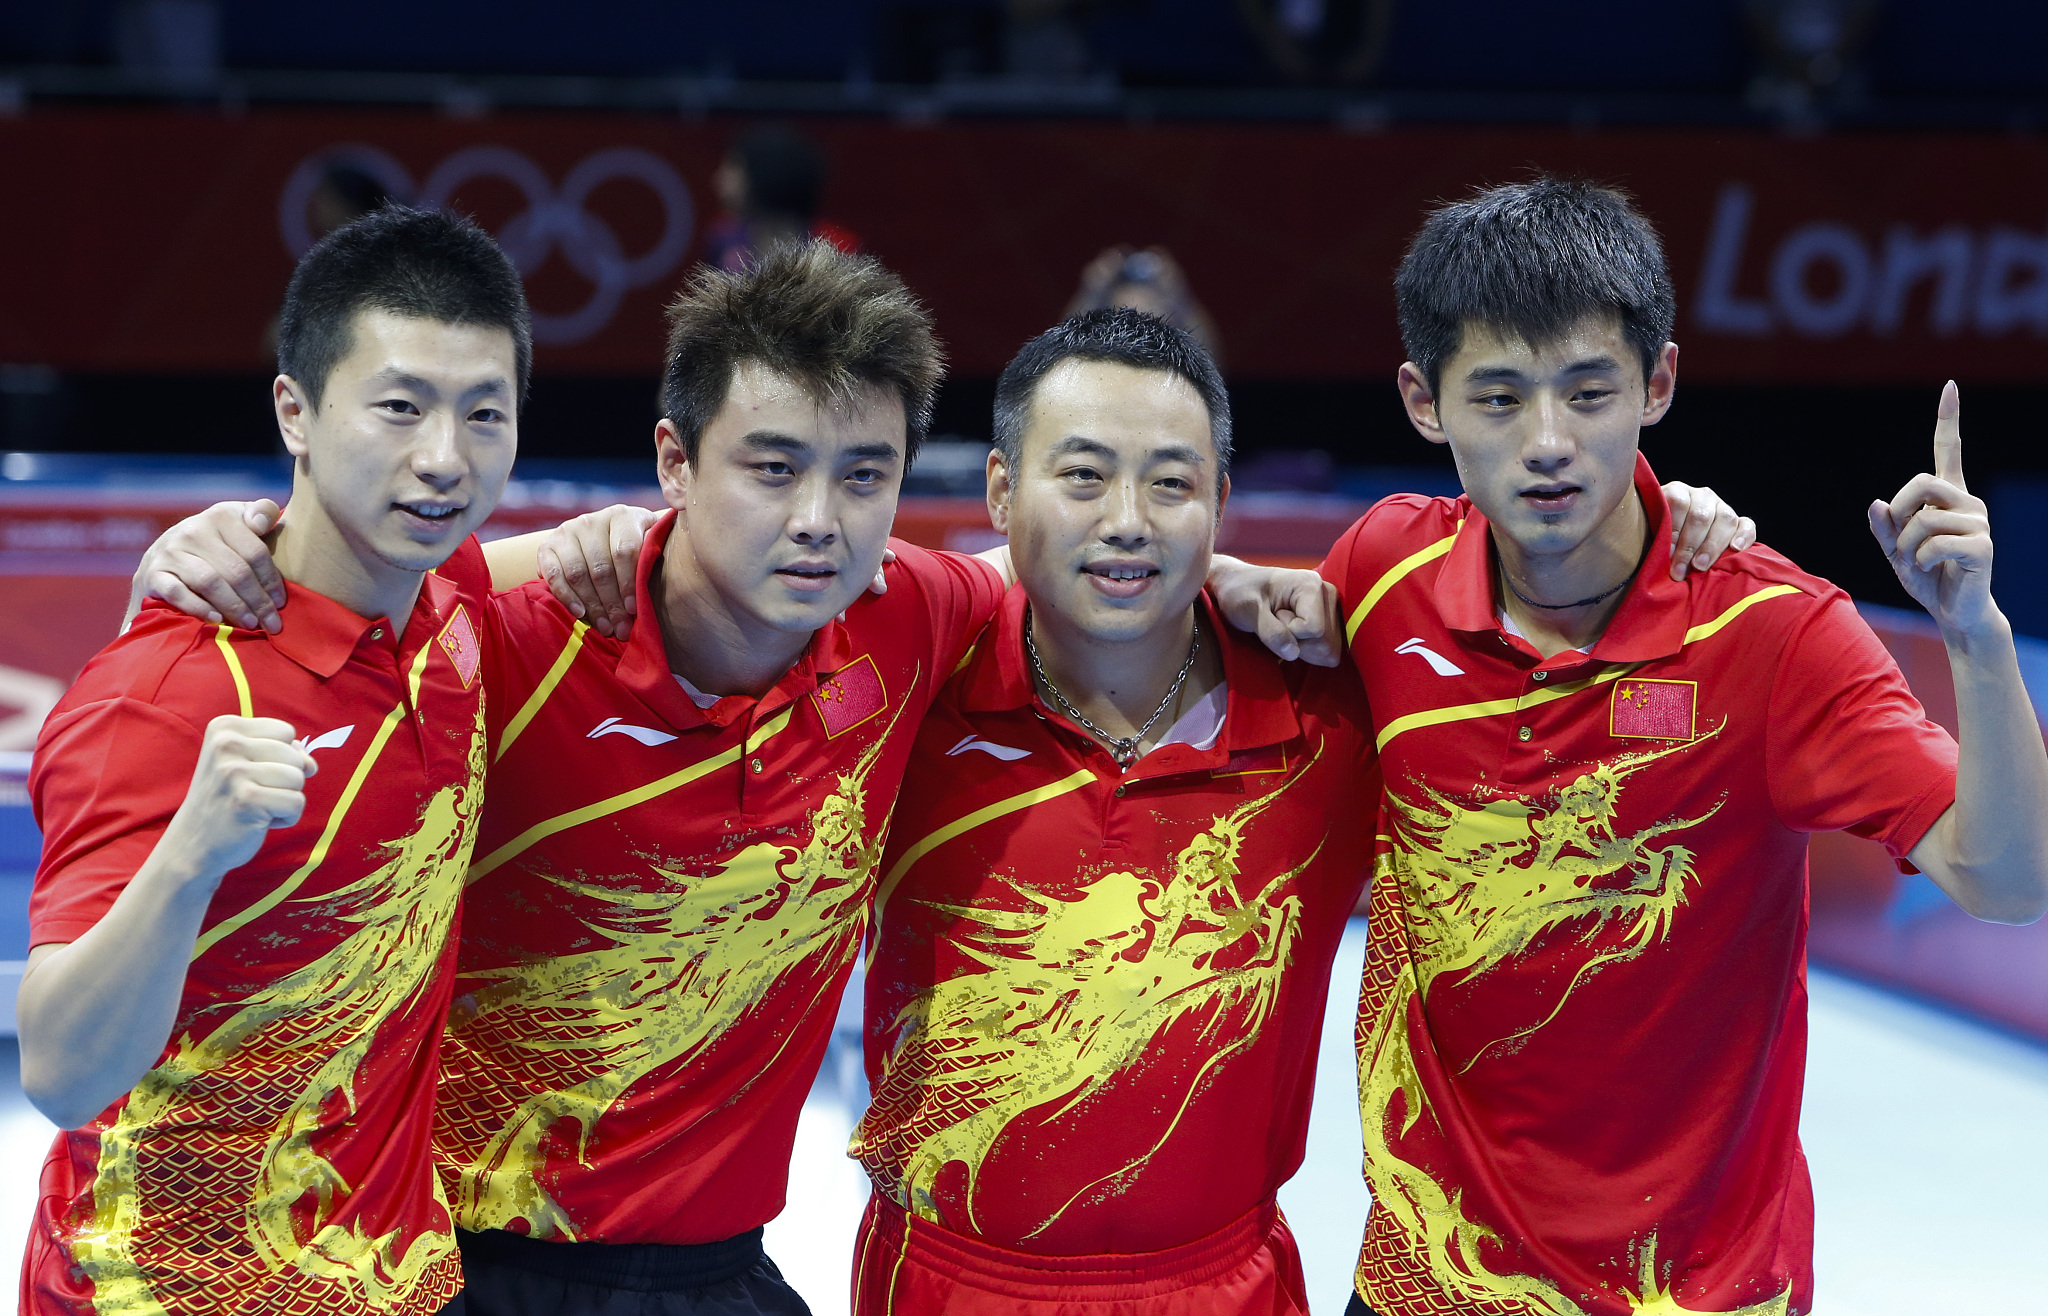 L-R: Ma Long, Wang Hao, coach Liu Guoliang, and Zhang Jike celebrate after winning the gold medal in the table tennis men's team final during the London 2012 Olympic Games in London, England, August 8, 2012. /CFP